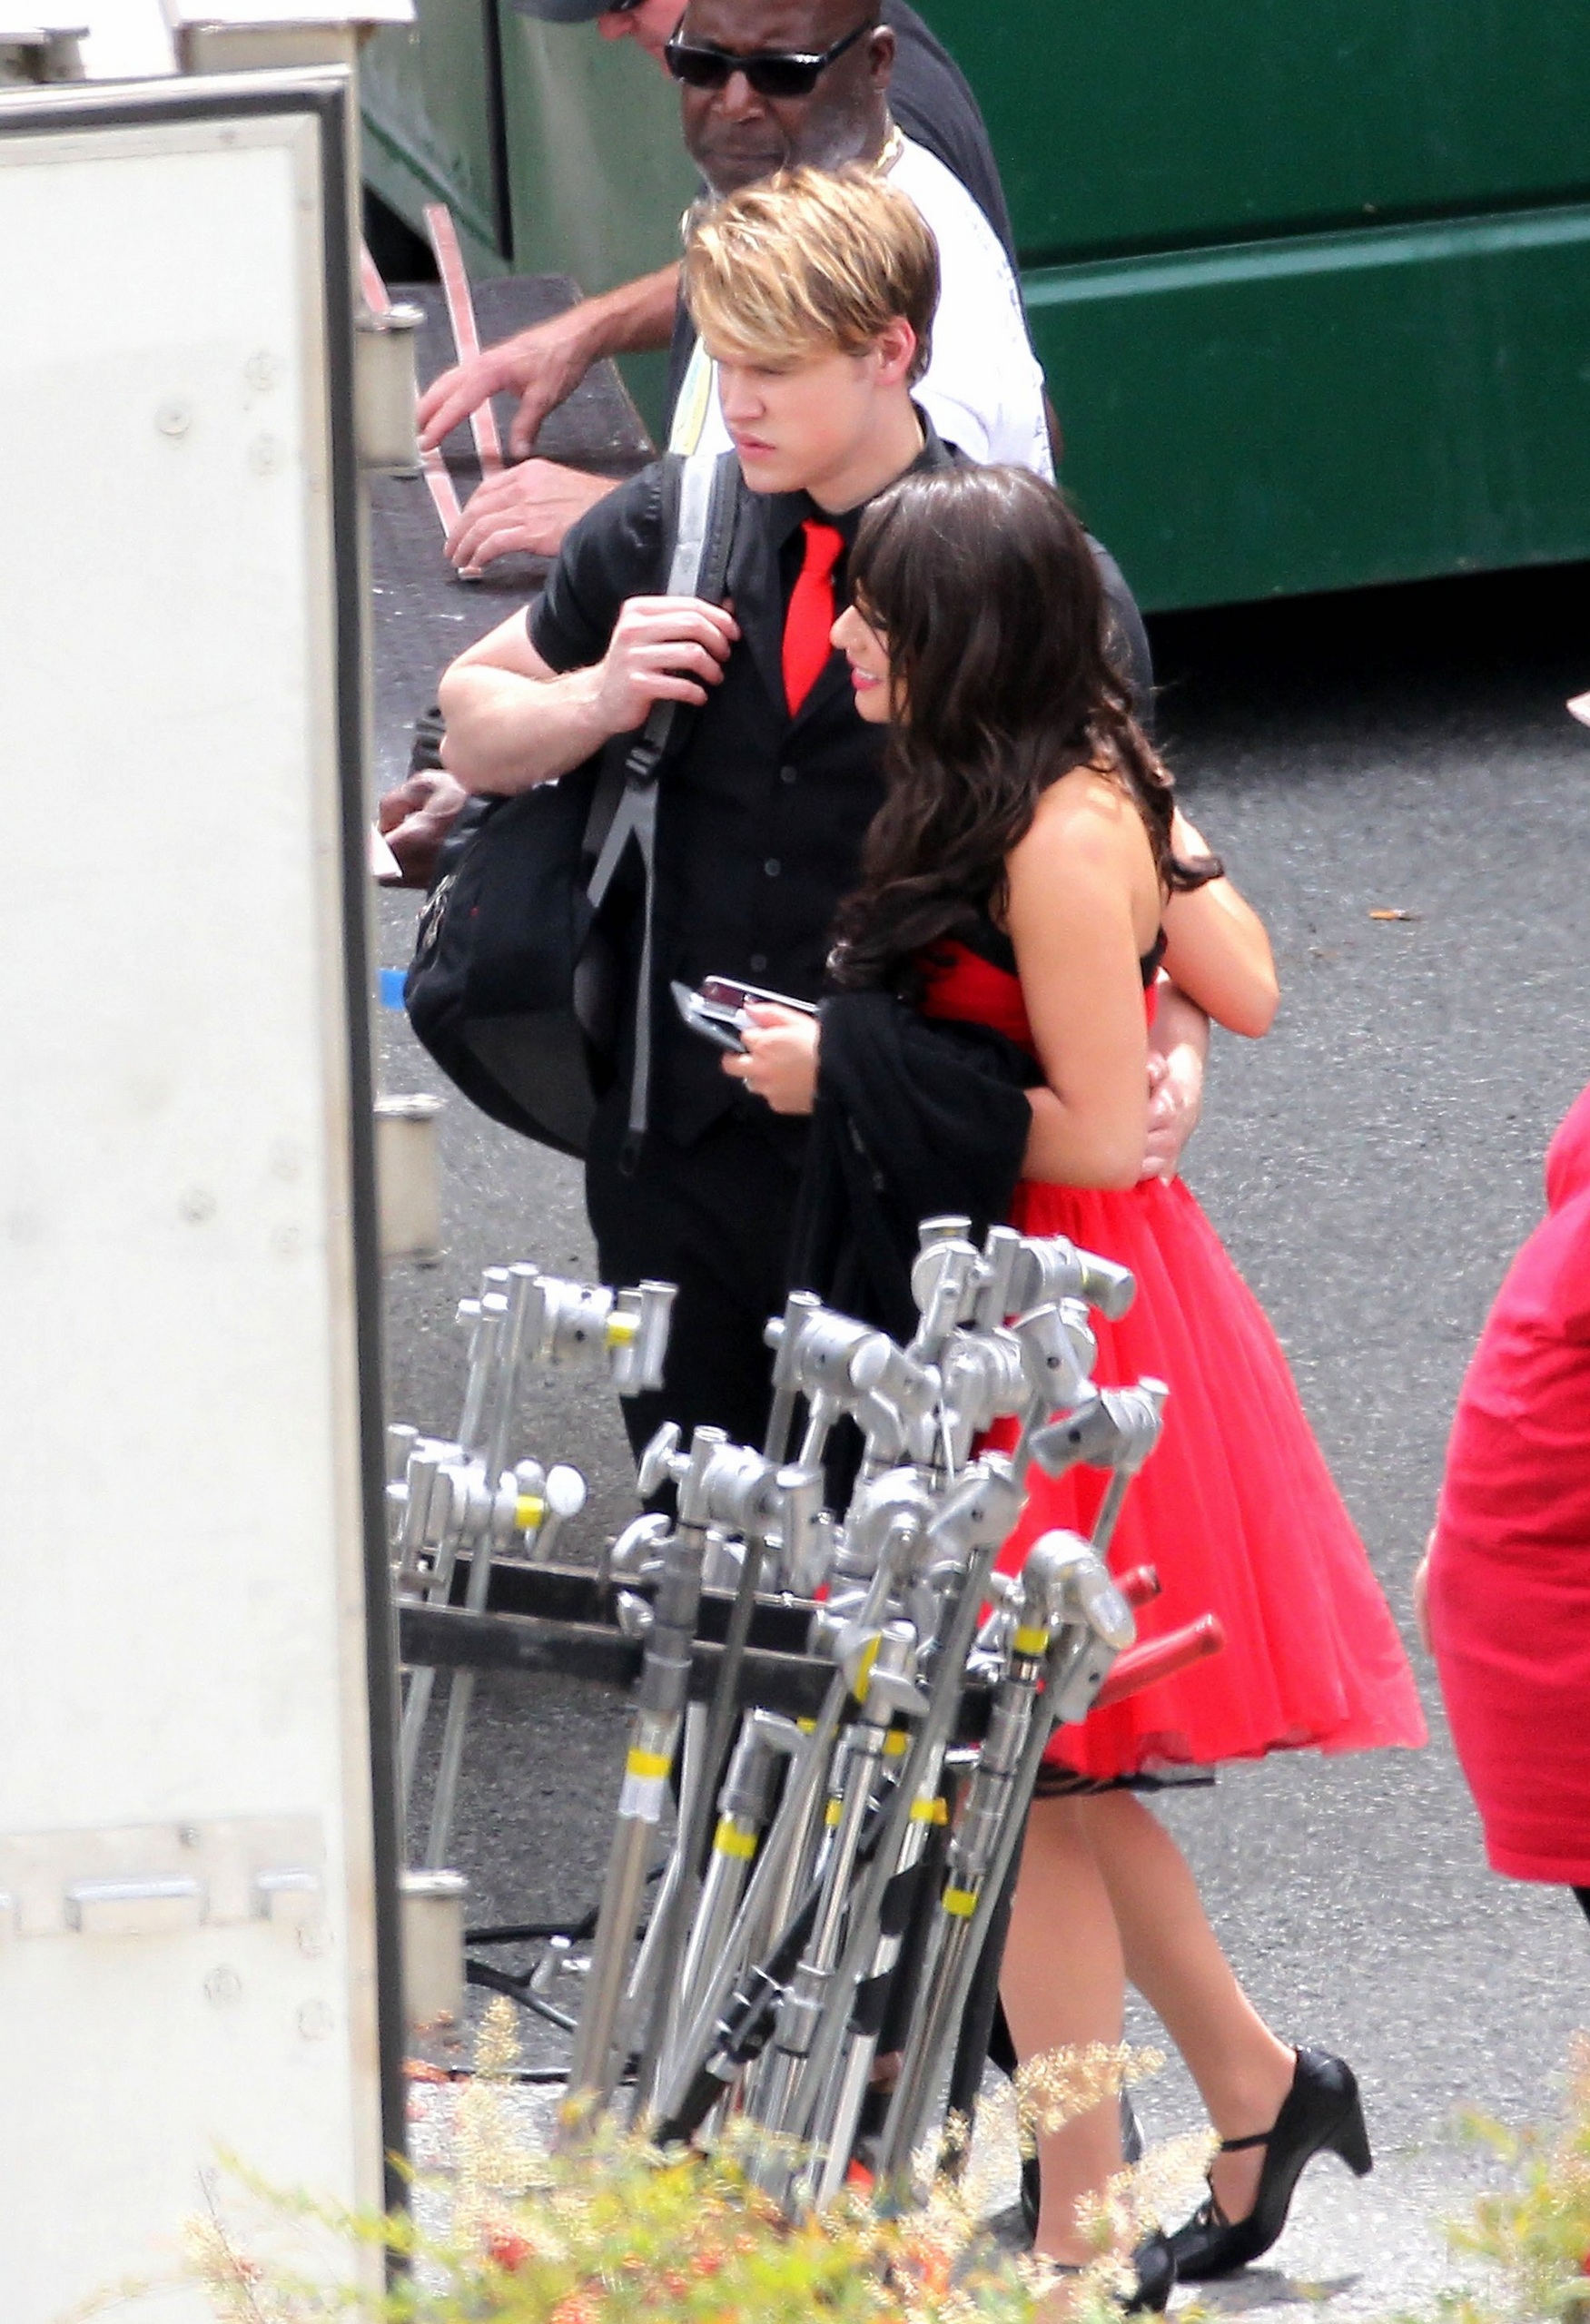 Lea Michele and Cory Monteith Images on Fanpop 